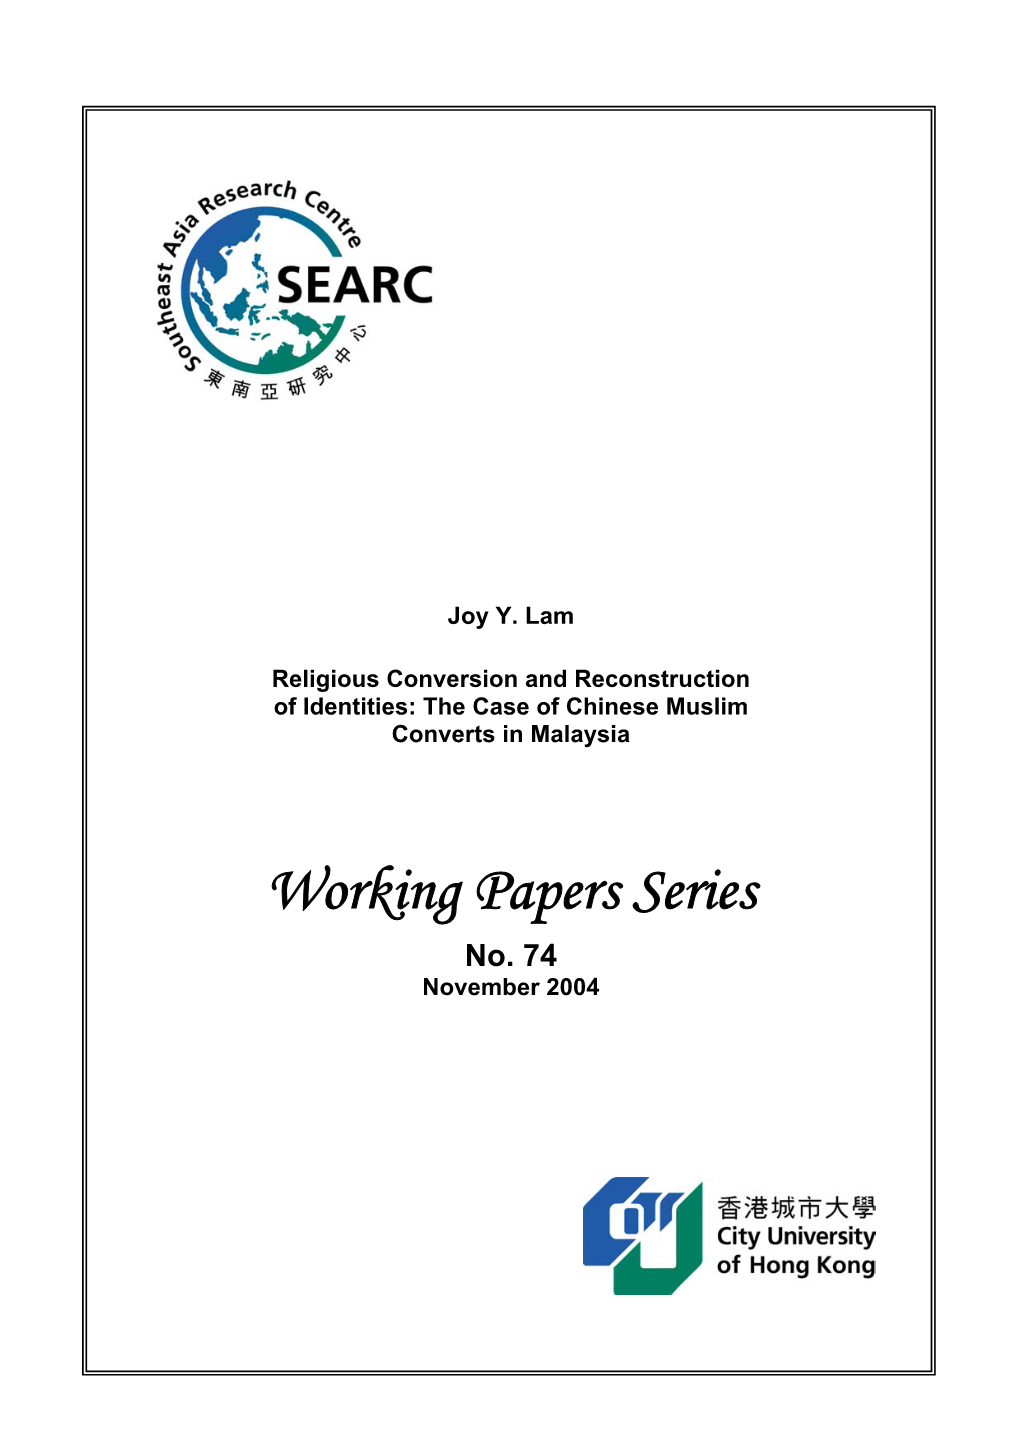 Working Papers Series No